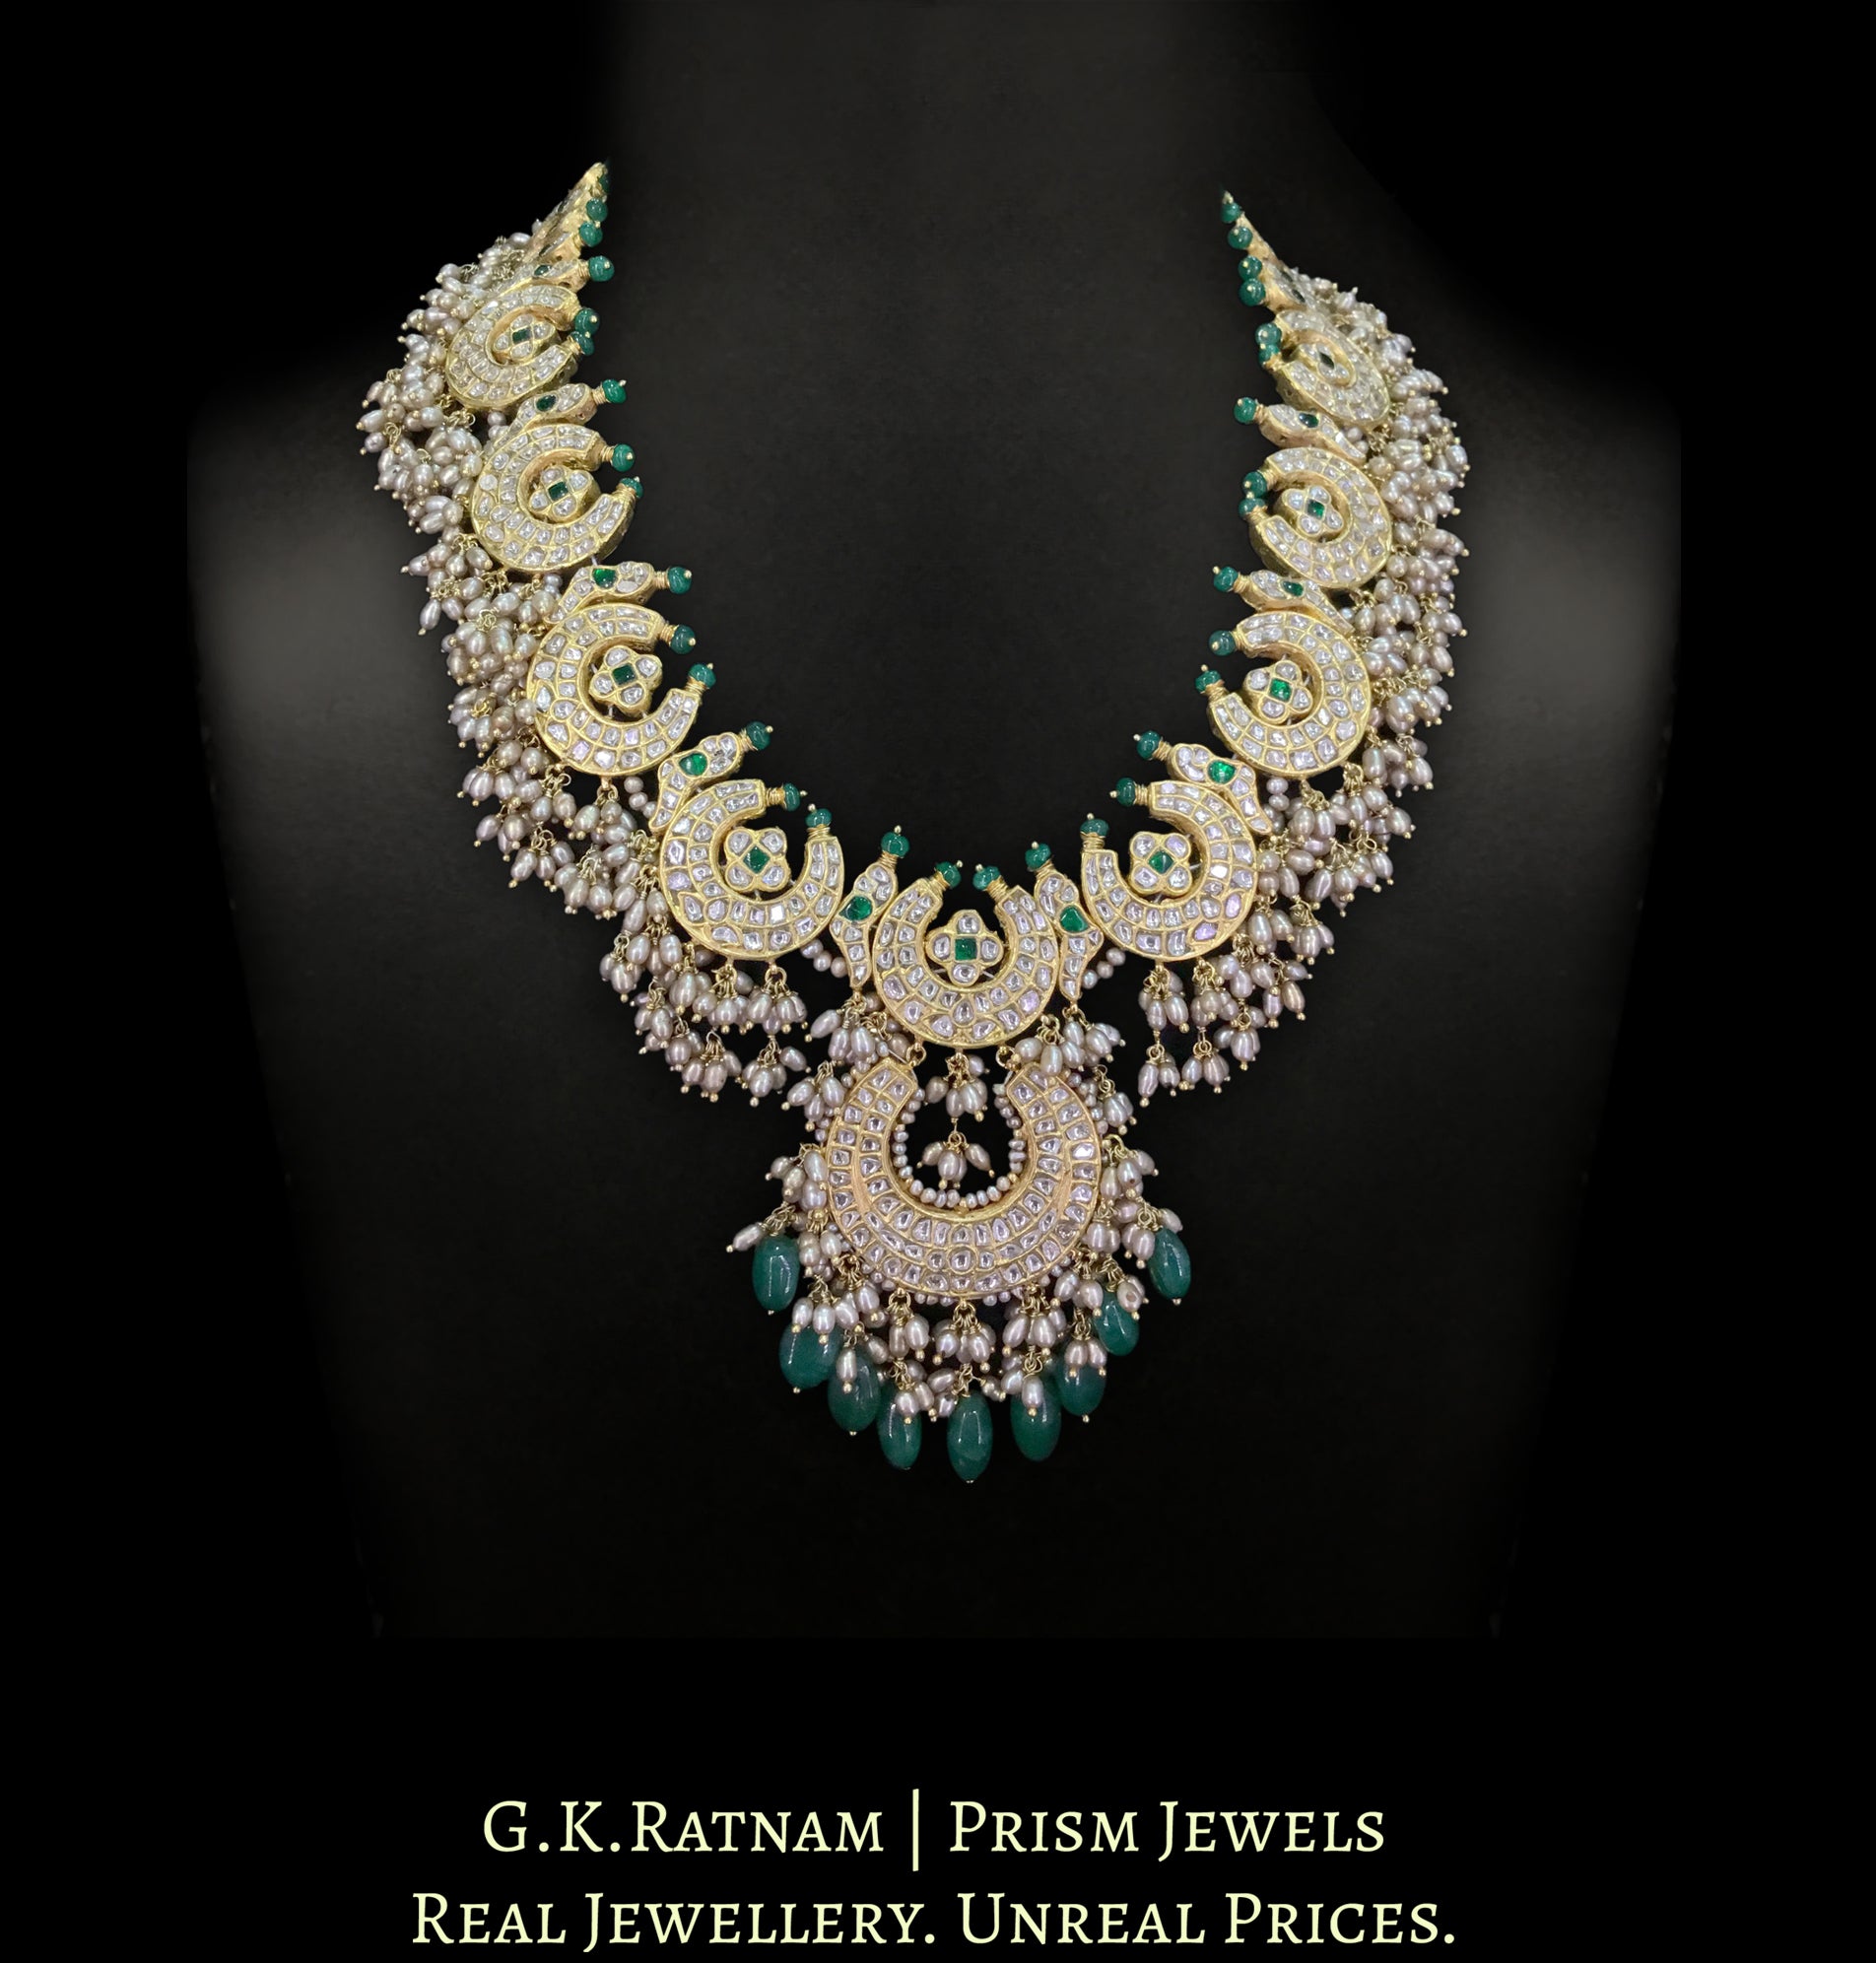 23K Gold and Diamond Polki Long Necklace with Chand Motifs strung in Antiqued Rice Pearls and Beryls